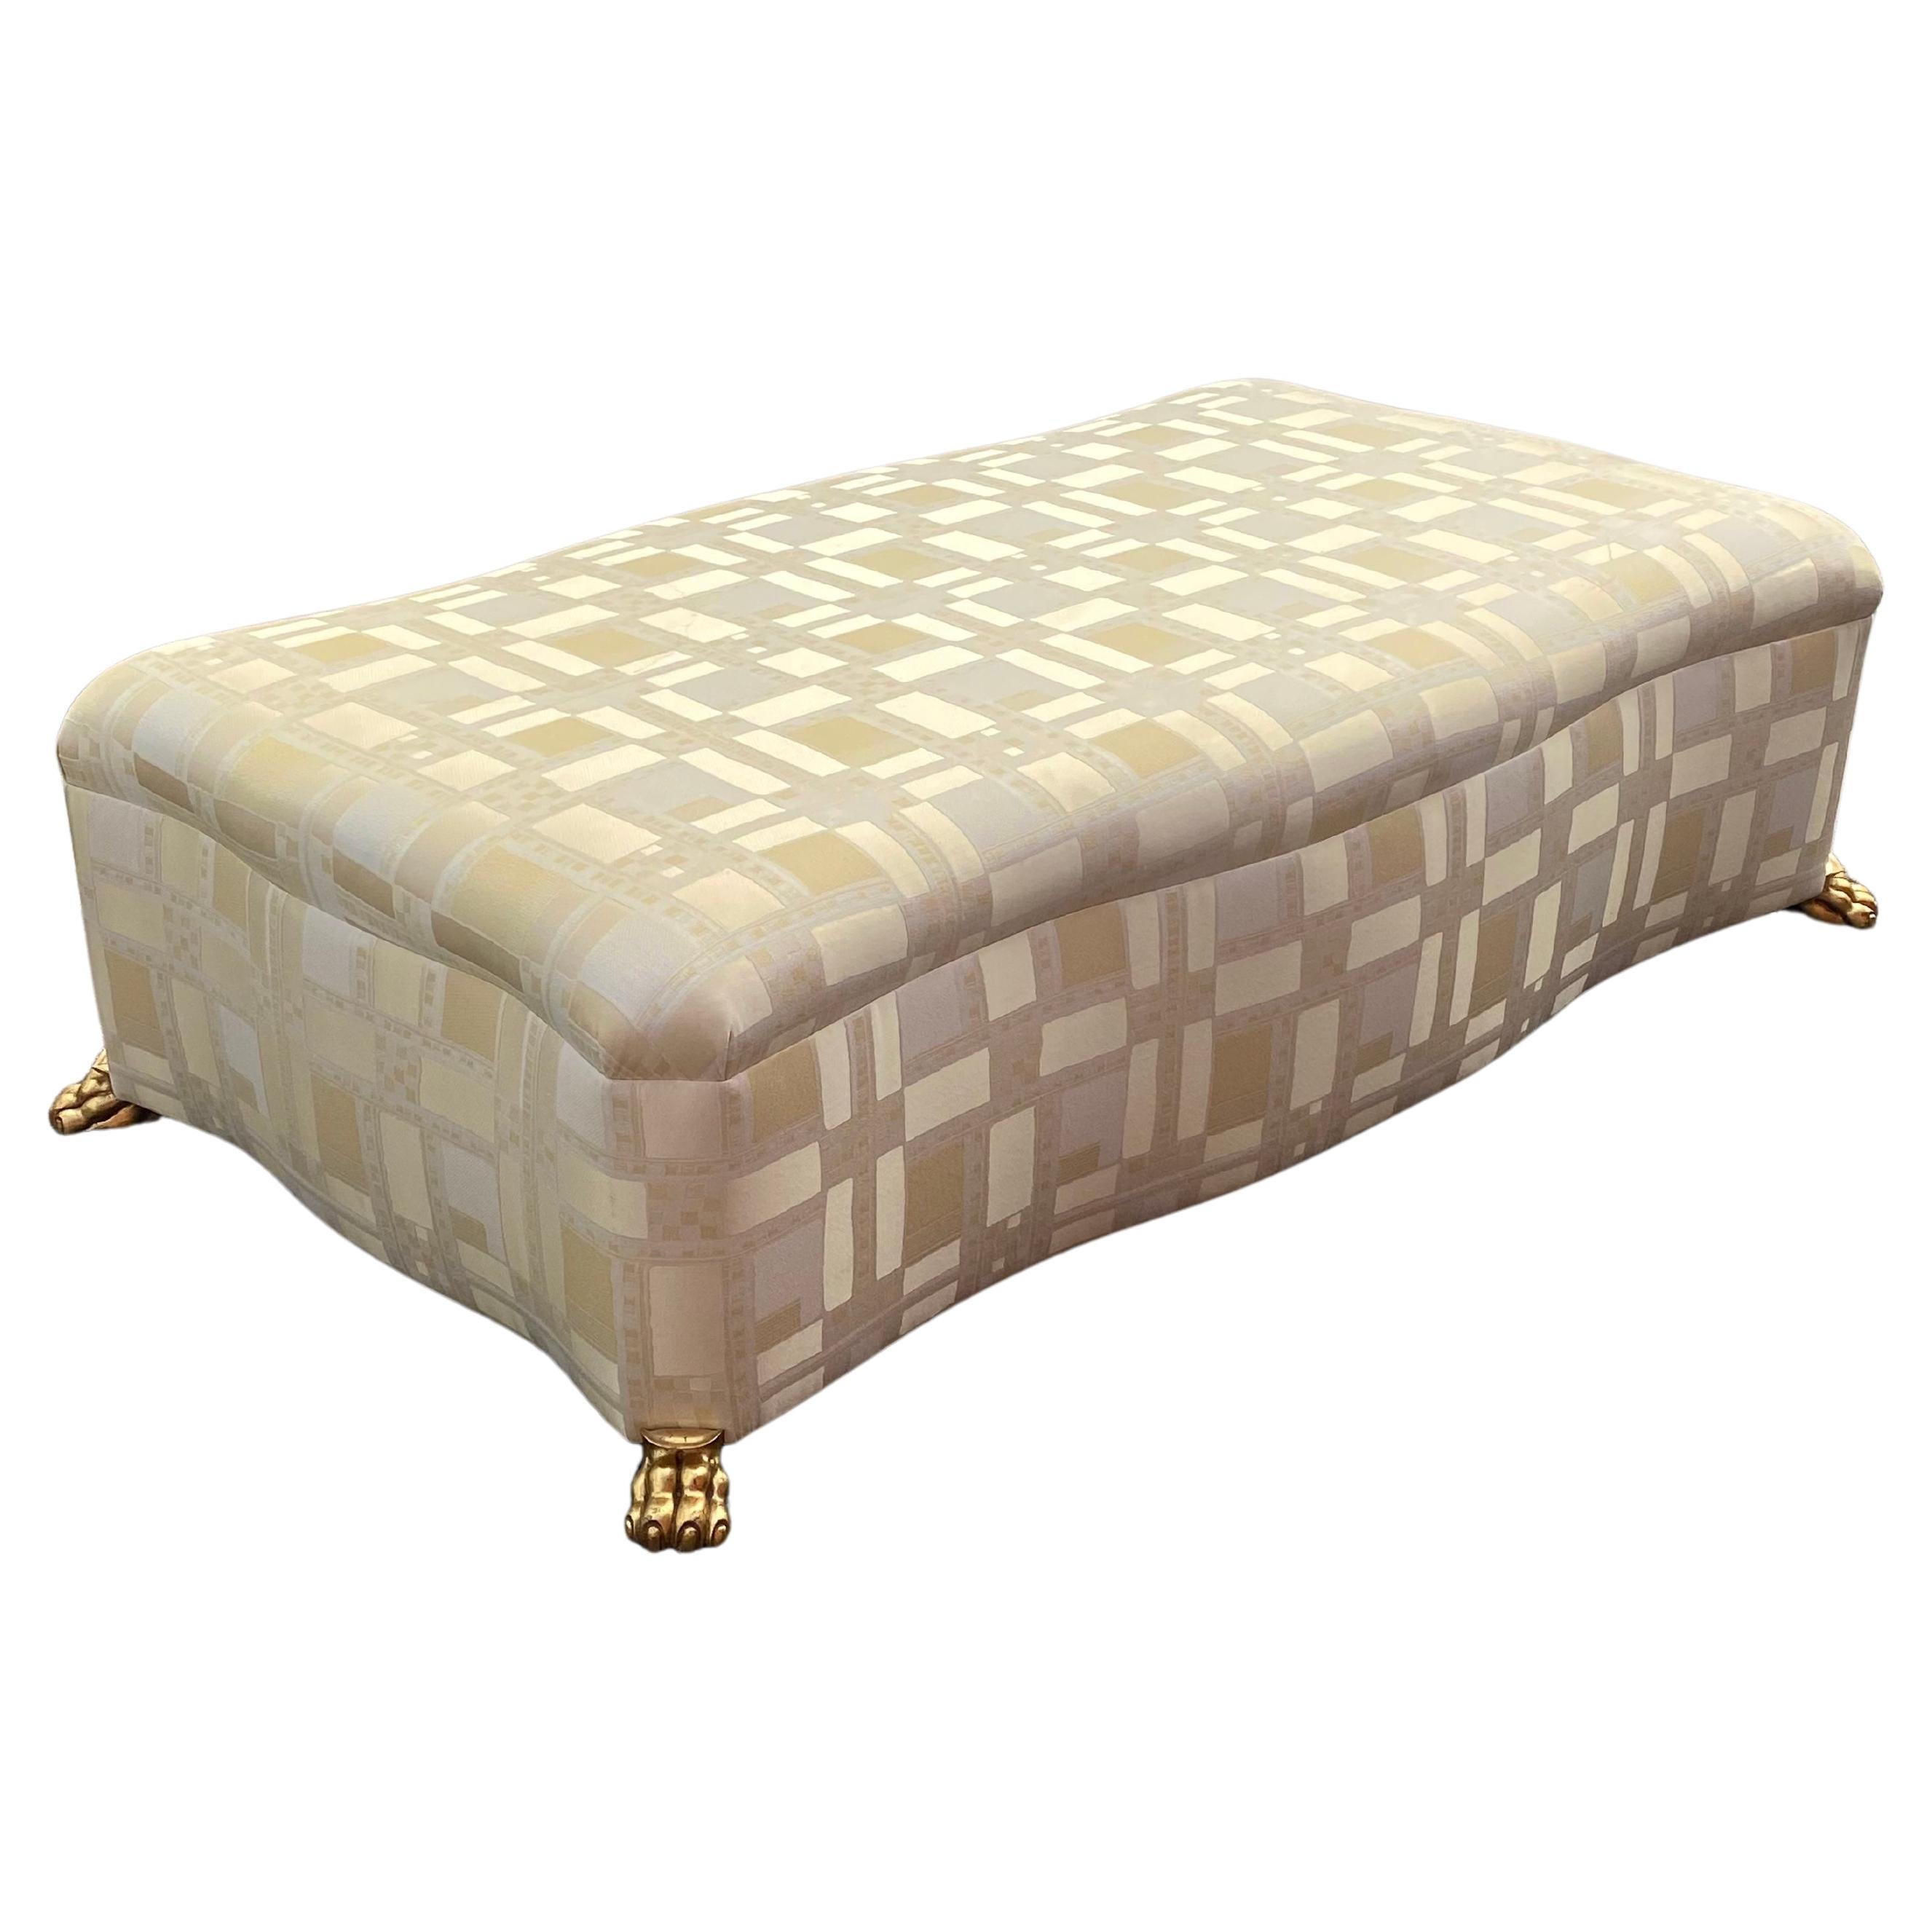 1980s Empire Style Sculptural Daybed Bench Ottoman